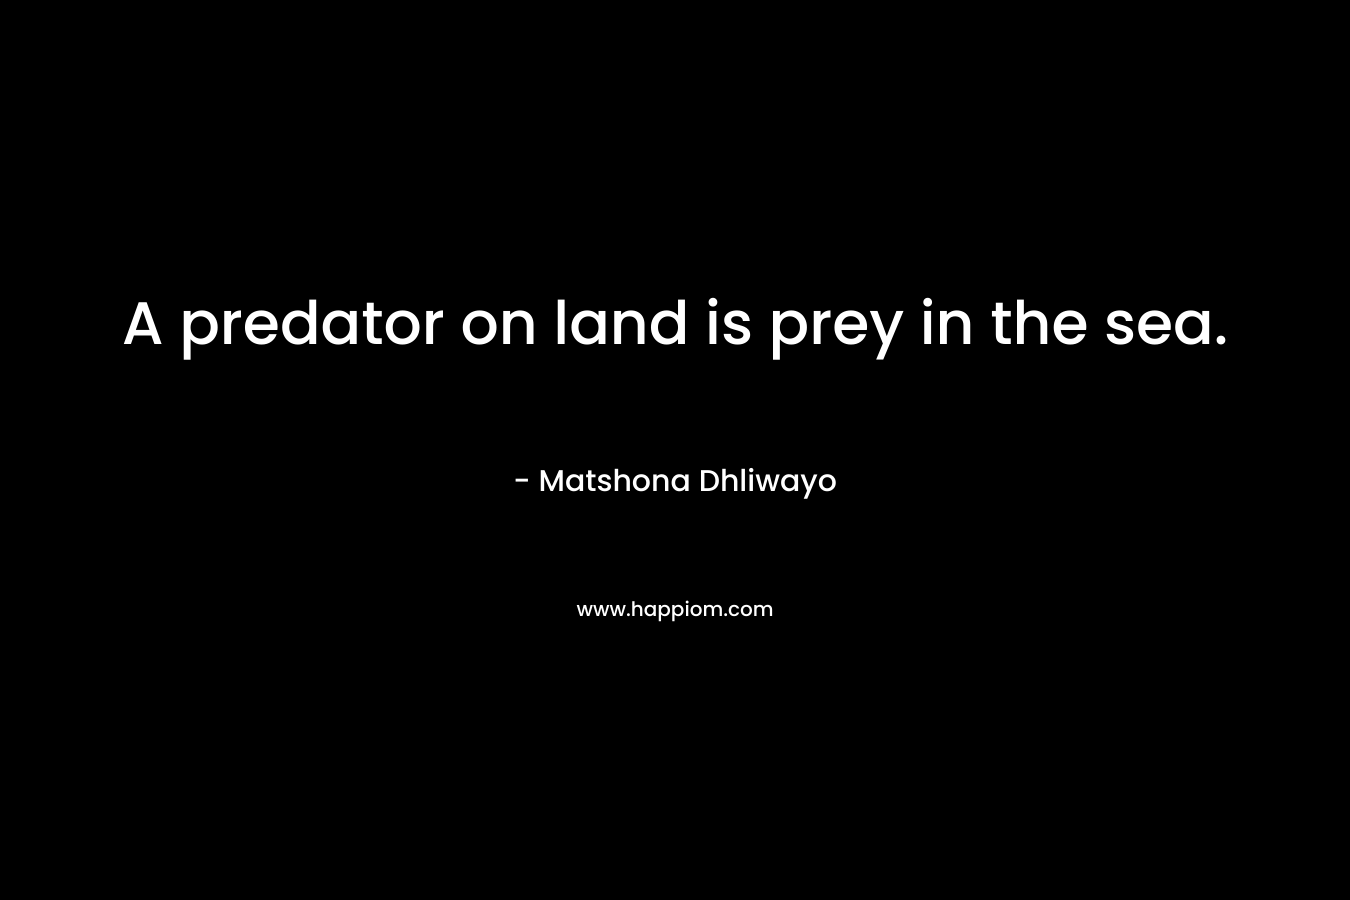 A predator on land is prey in the sea.